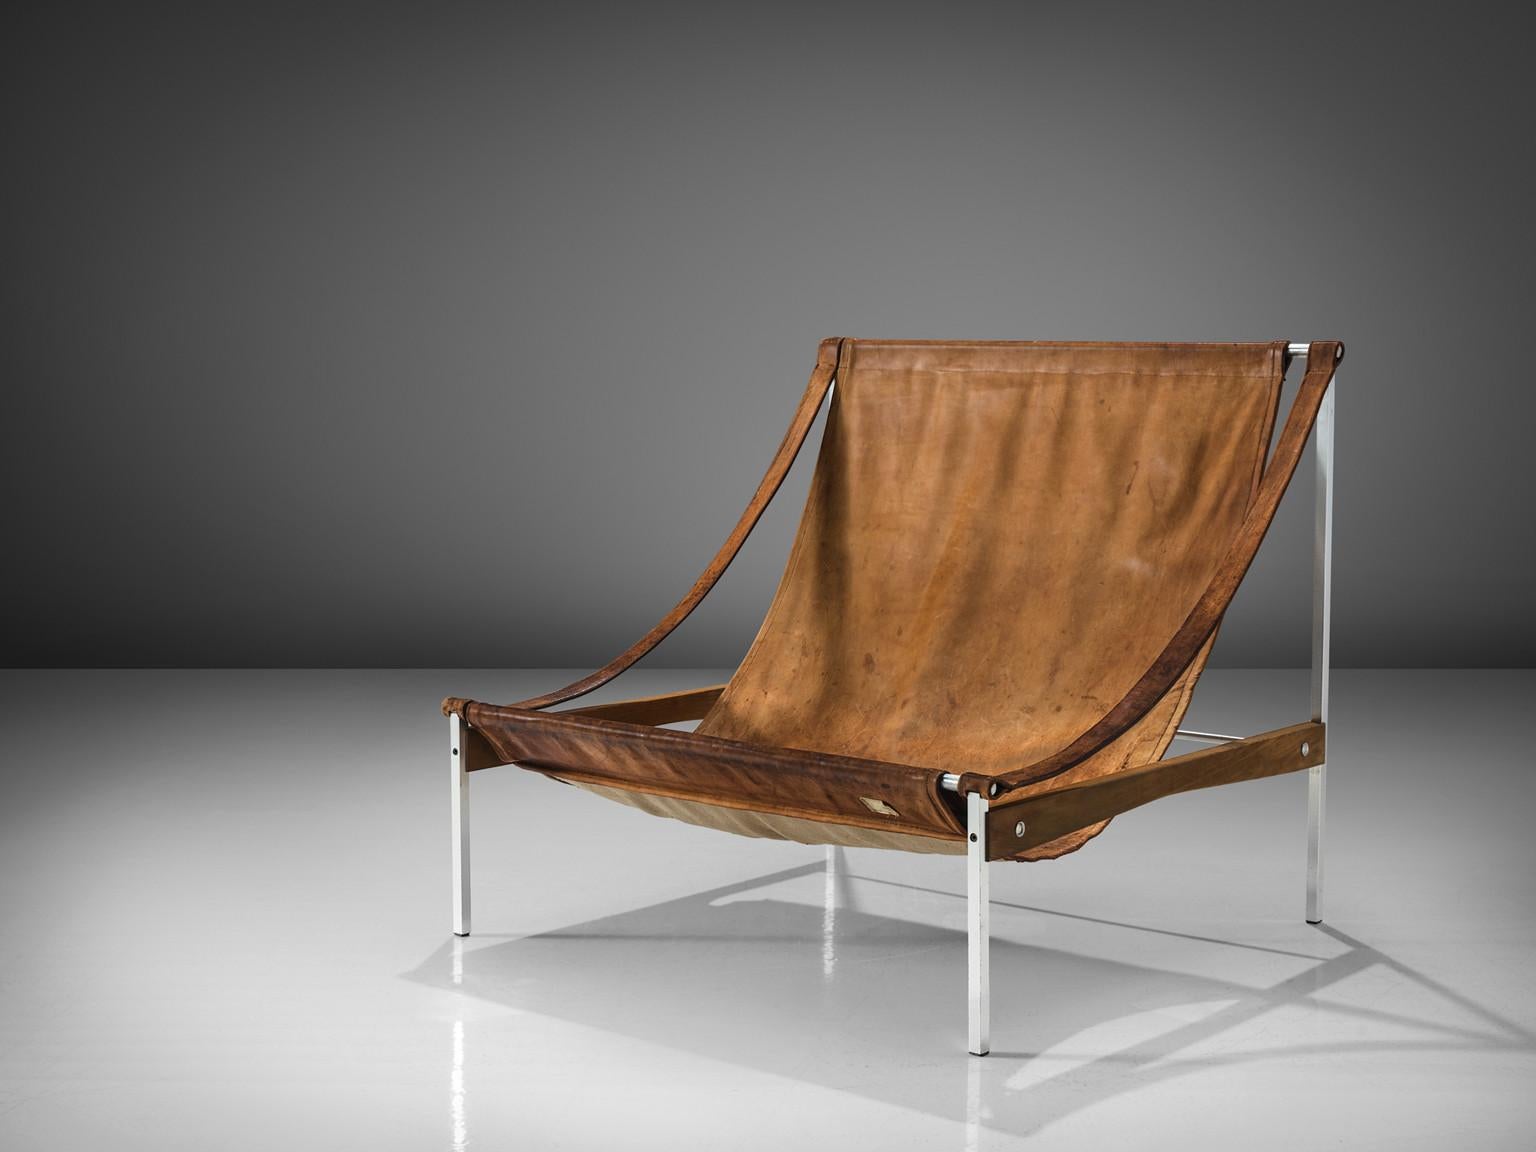 Stig Poulsson, lounge chair, model 'Bequem', leather, aluminum, ash, Denmark, designed 1968-1969

This 'Bequem' lounge chair is designed by Stig Poulsson. The most striking feature of this extraordinary chair is its sheer size. The width of this